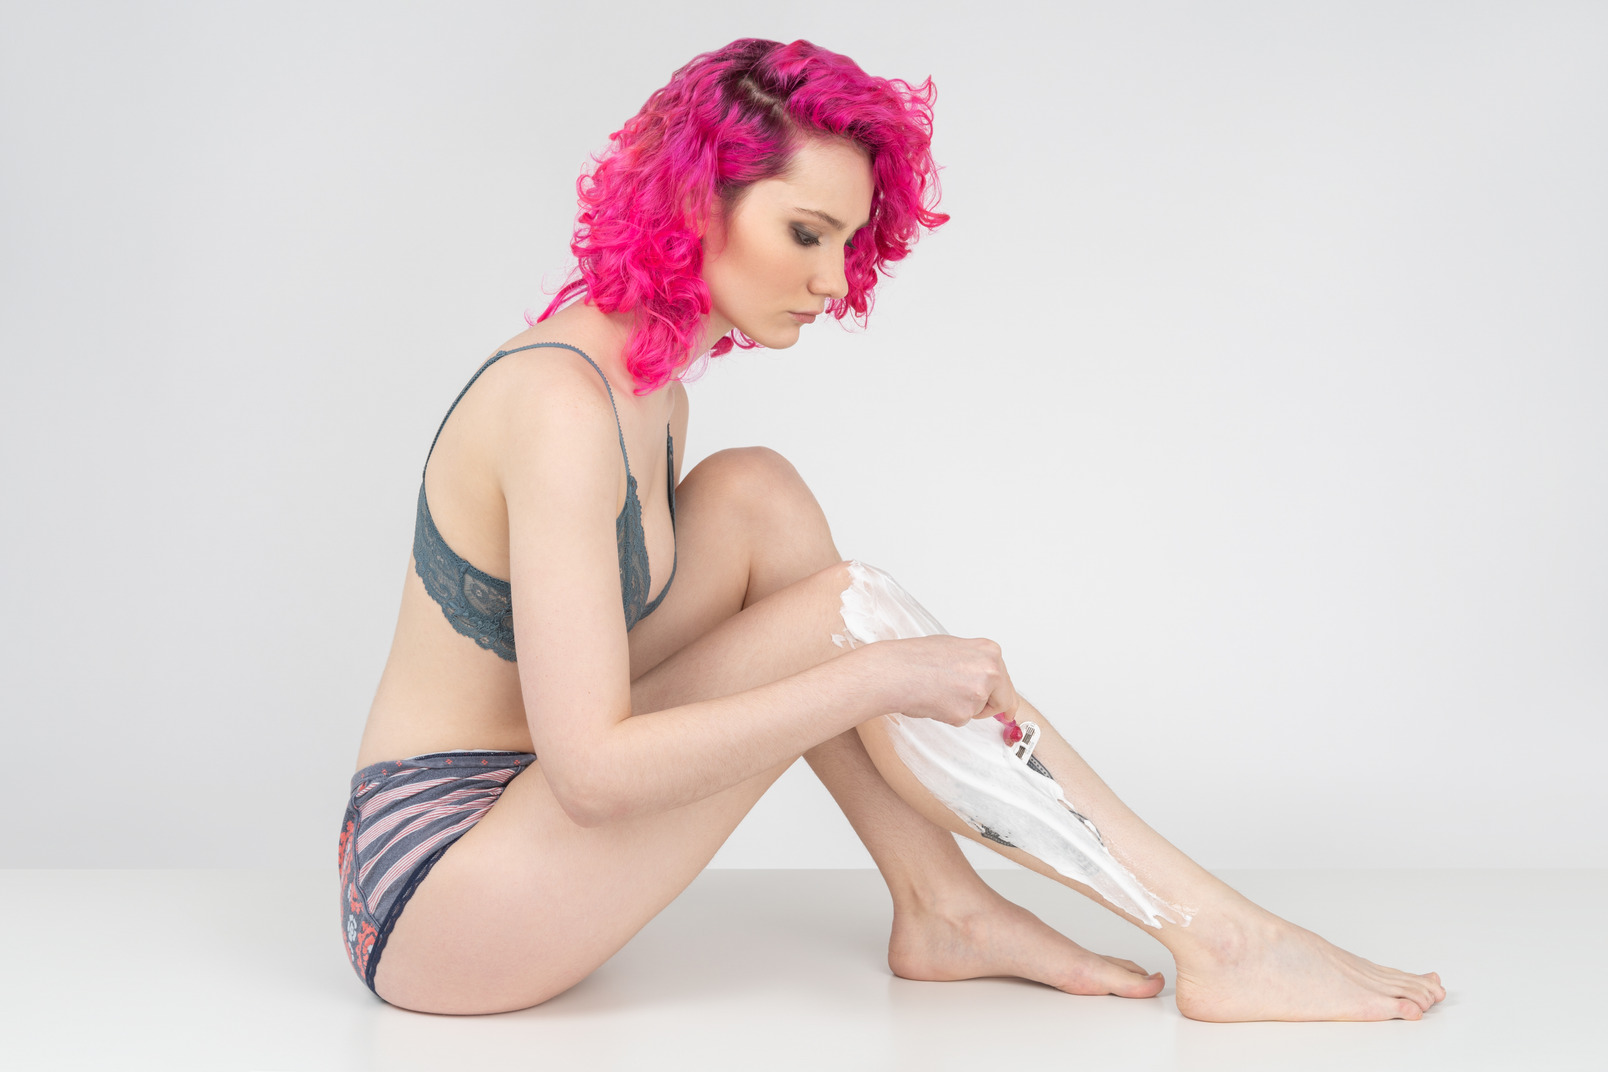 Young woman with curly pink hair shaving legs